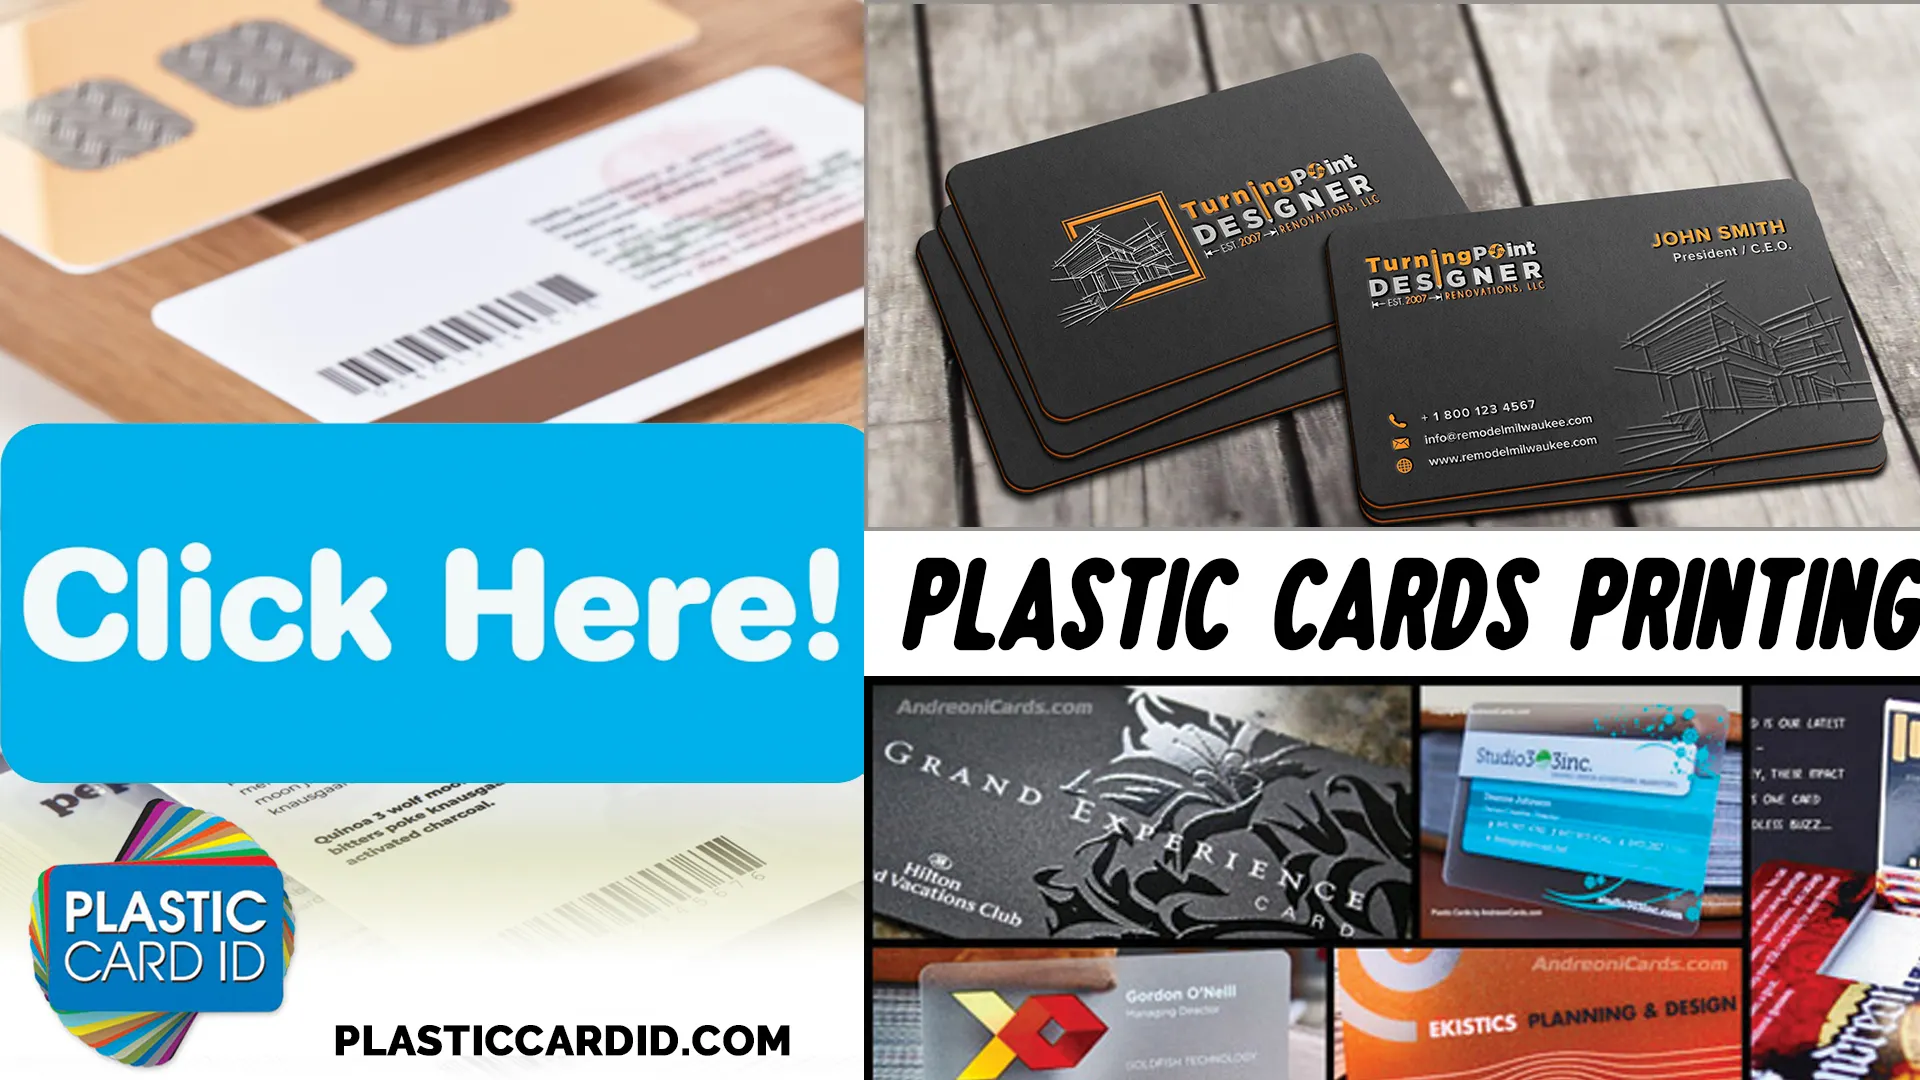 Welcome to the Frontier of Plastic Card Innovation